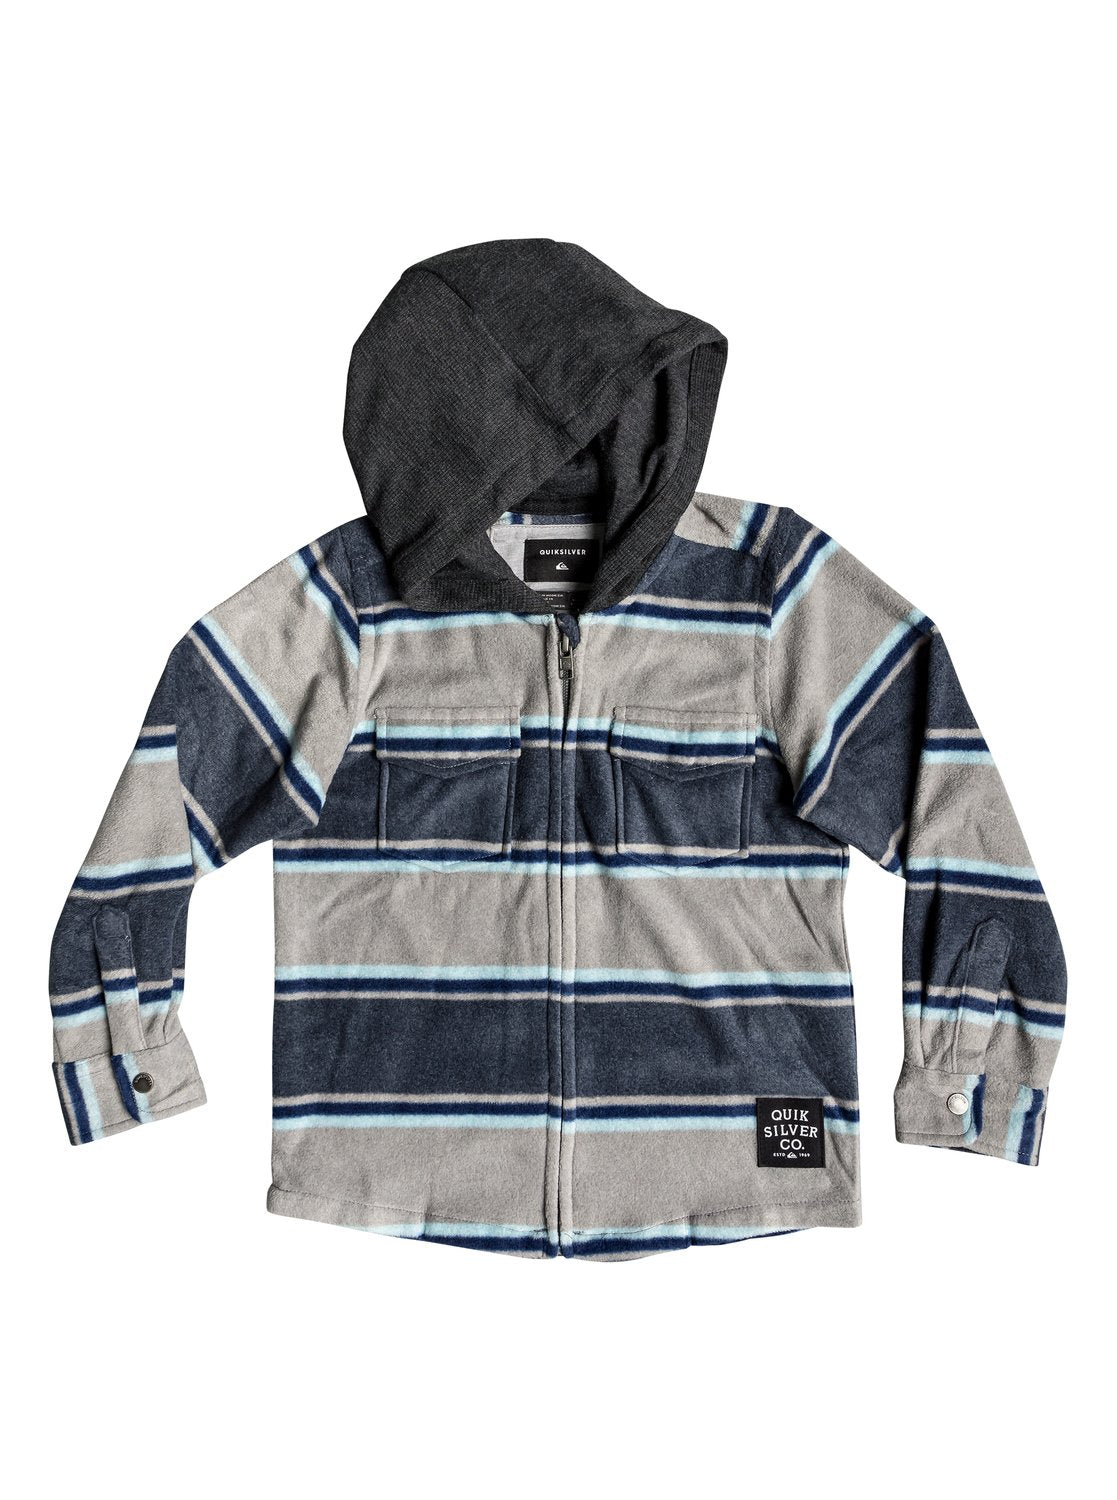 Quiksilver Surf Days Youth Jacket BST3 5